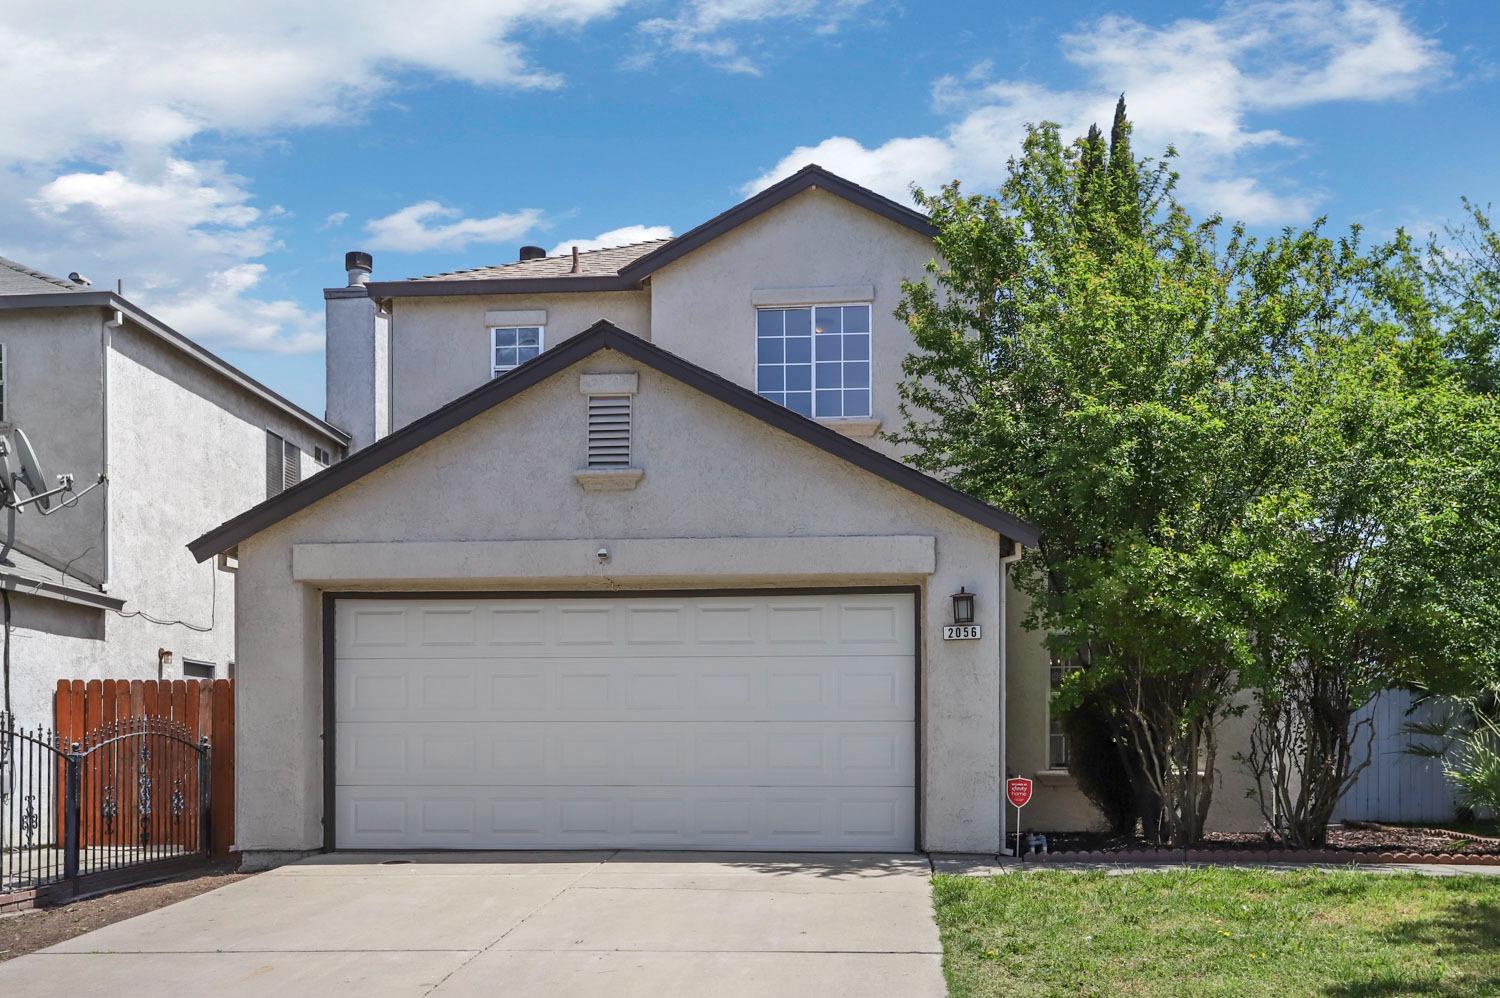 Photo of 2056 Middle River Dr in Stockton, CA